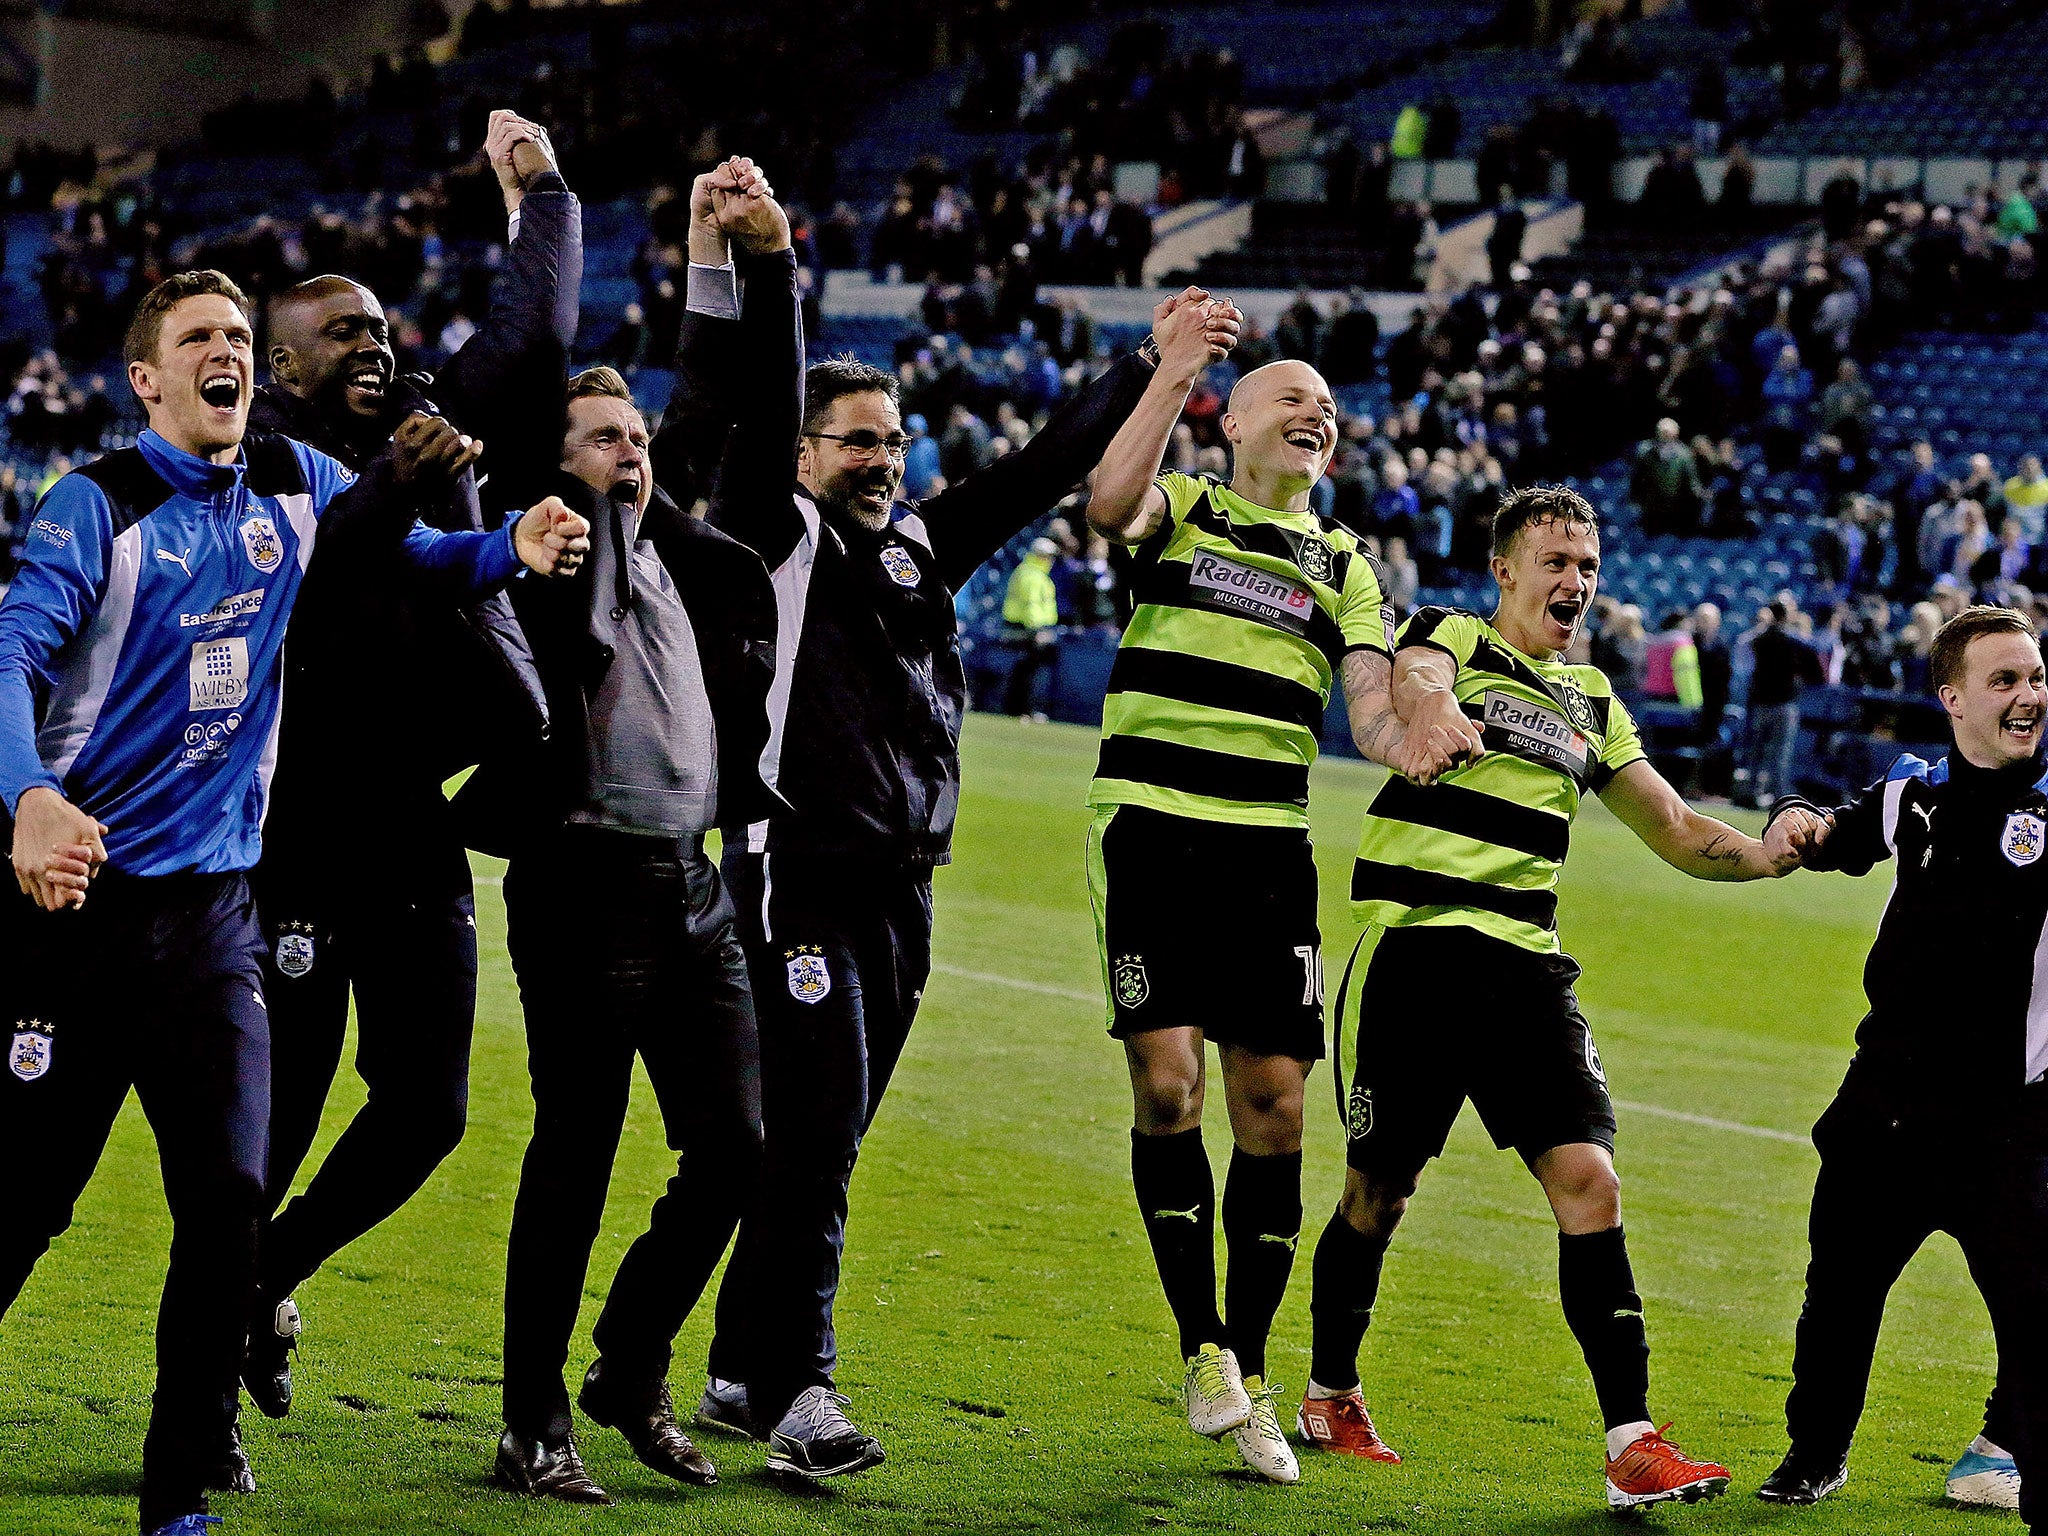 Huddersfield saw off Sheffield Wednesday to reach the play-off final